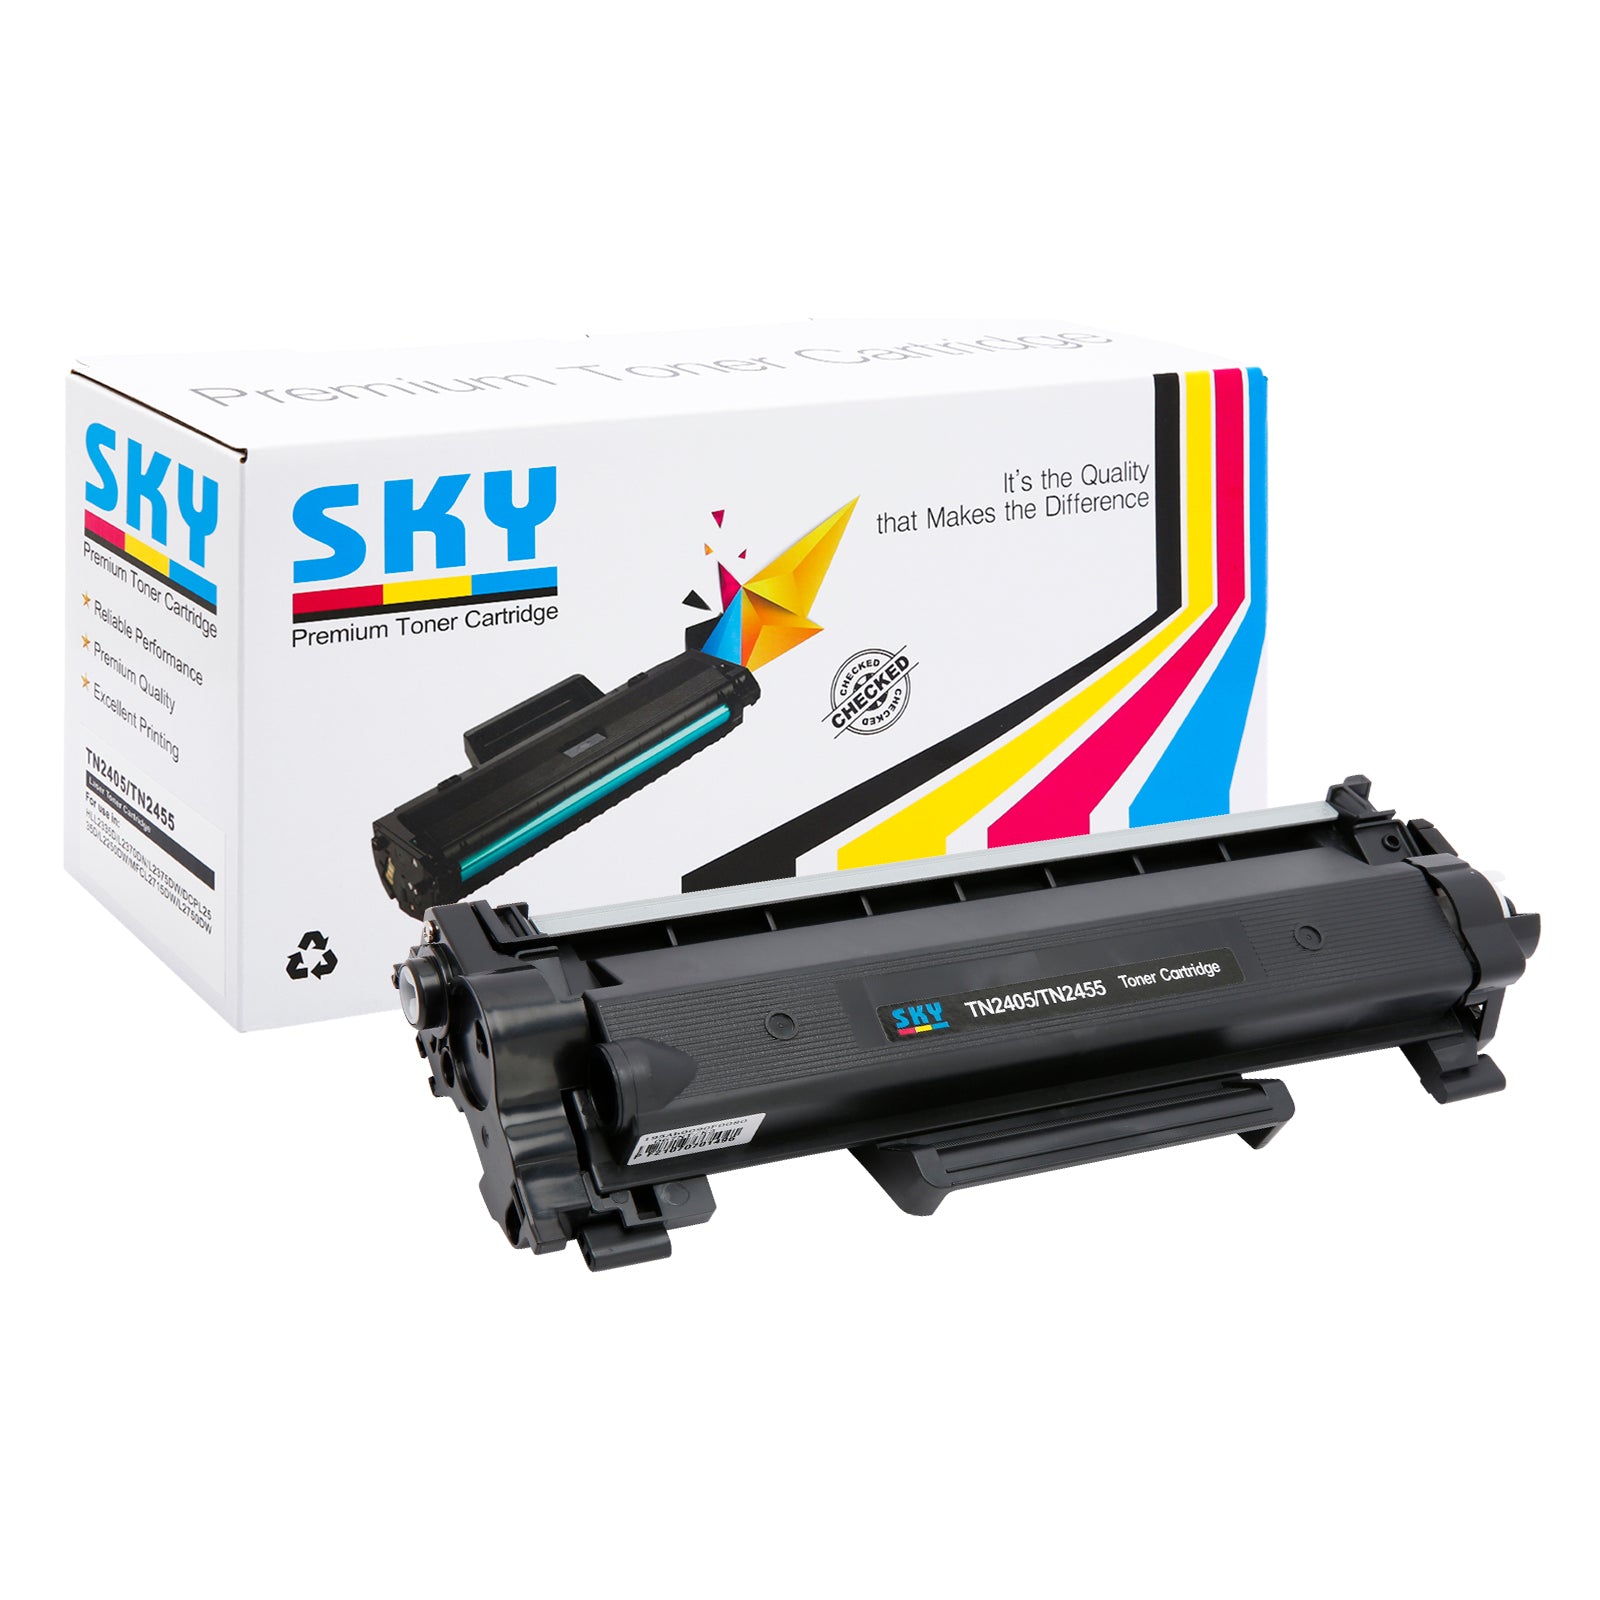 SKY TN-2455 Toner Cartridge for Brother  HL-2335D, L2370DN  DCP-L2535D and DCP-L2550DW - 3000 pages